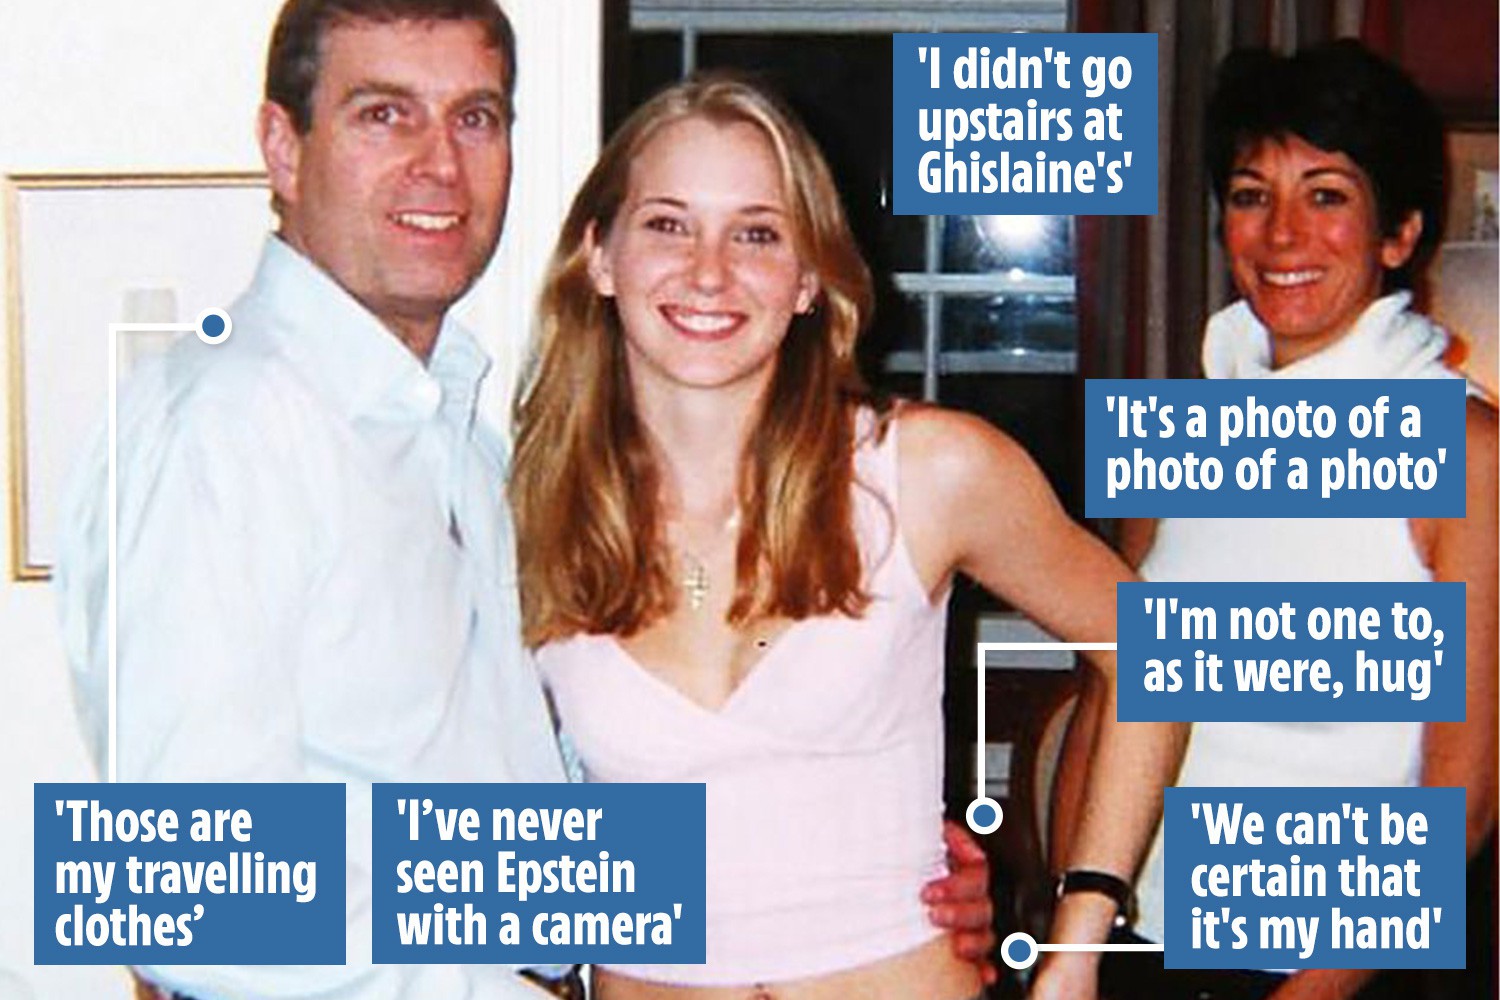 Prince Andrew has suggested that the photo of him with his arm around 17-year-old sex slave Virginia Roberts is fake 